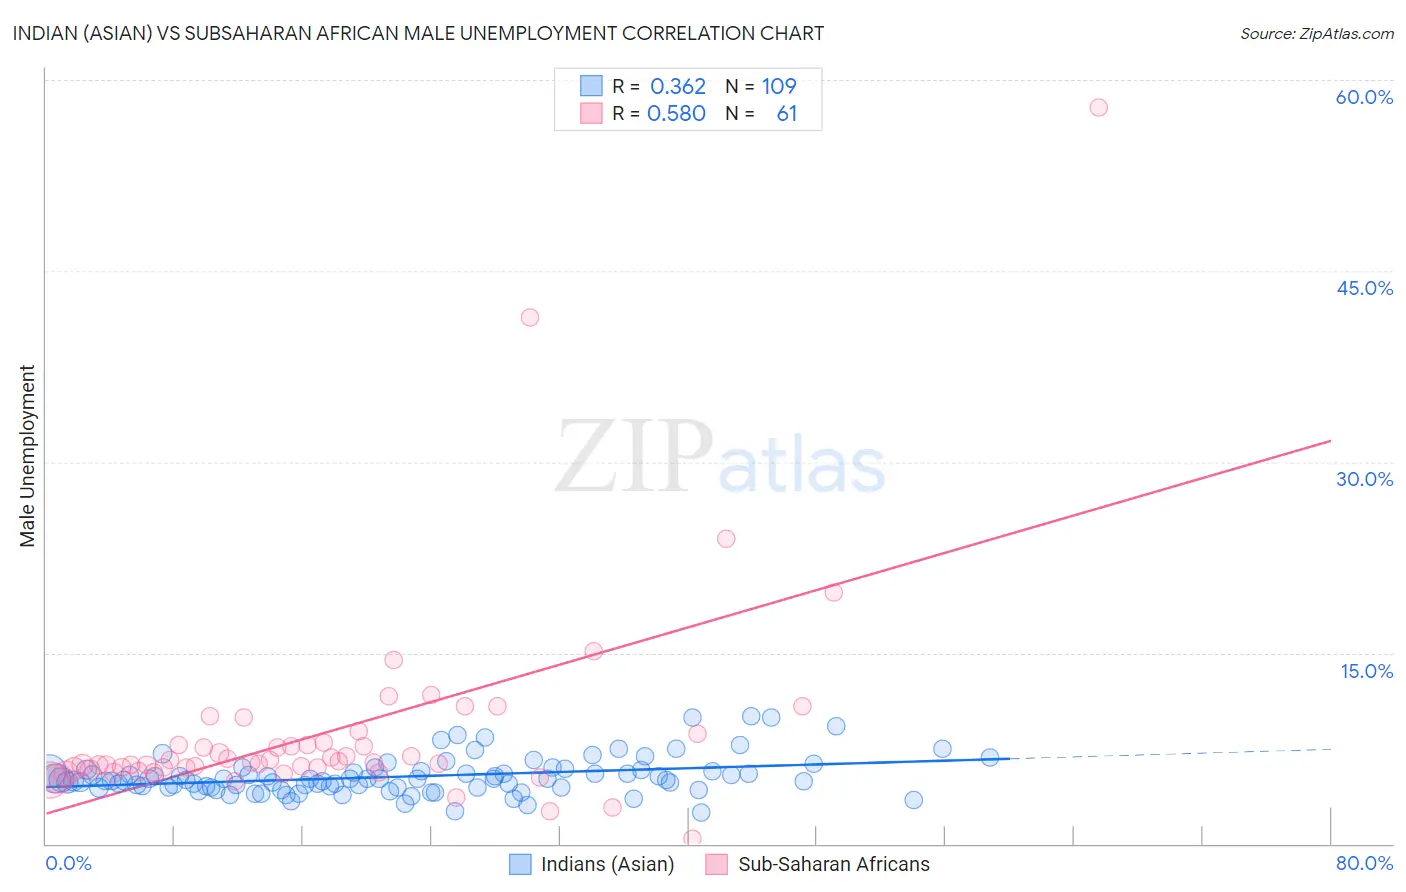 Indian (Asian) vs Subsaharan African Male Unemployment